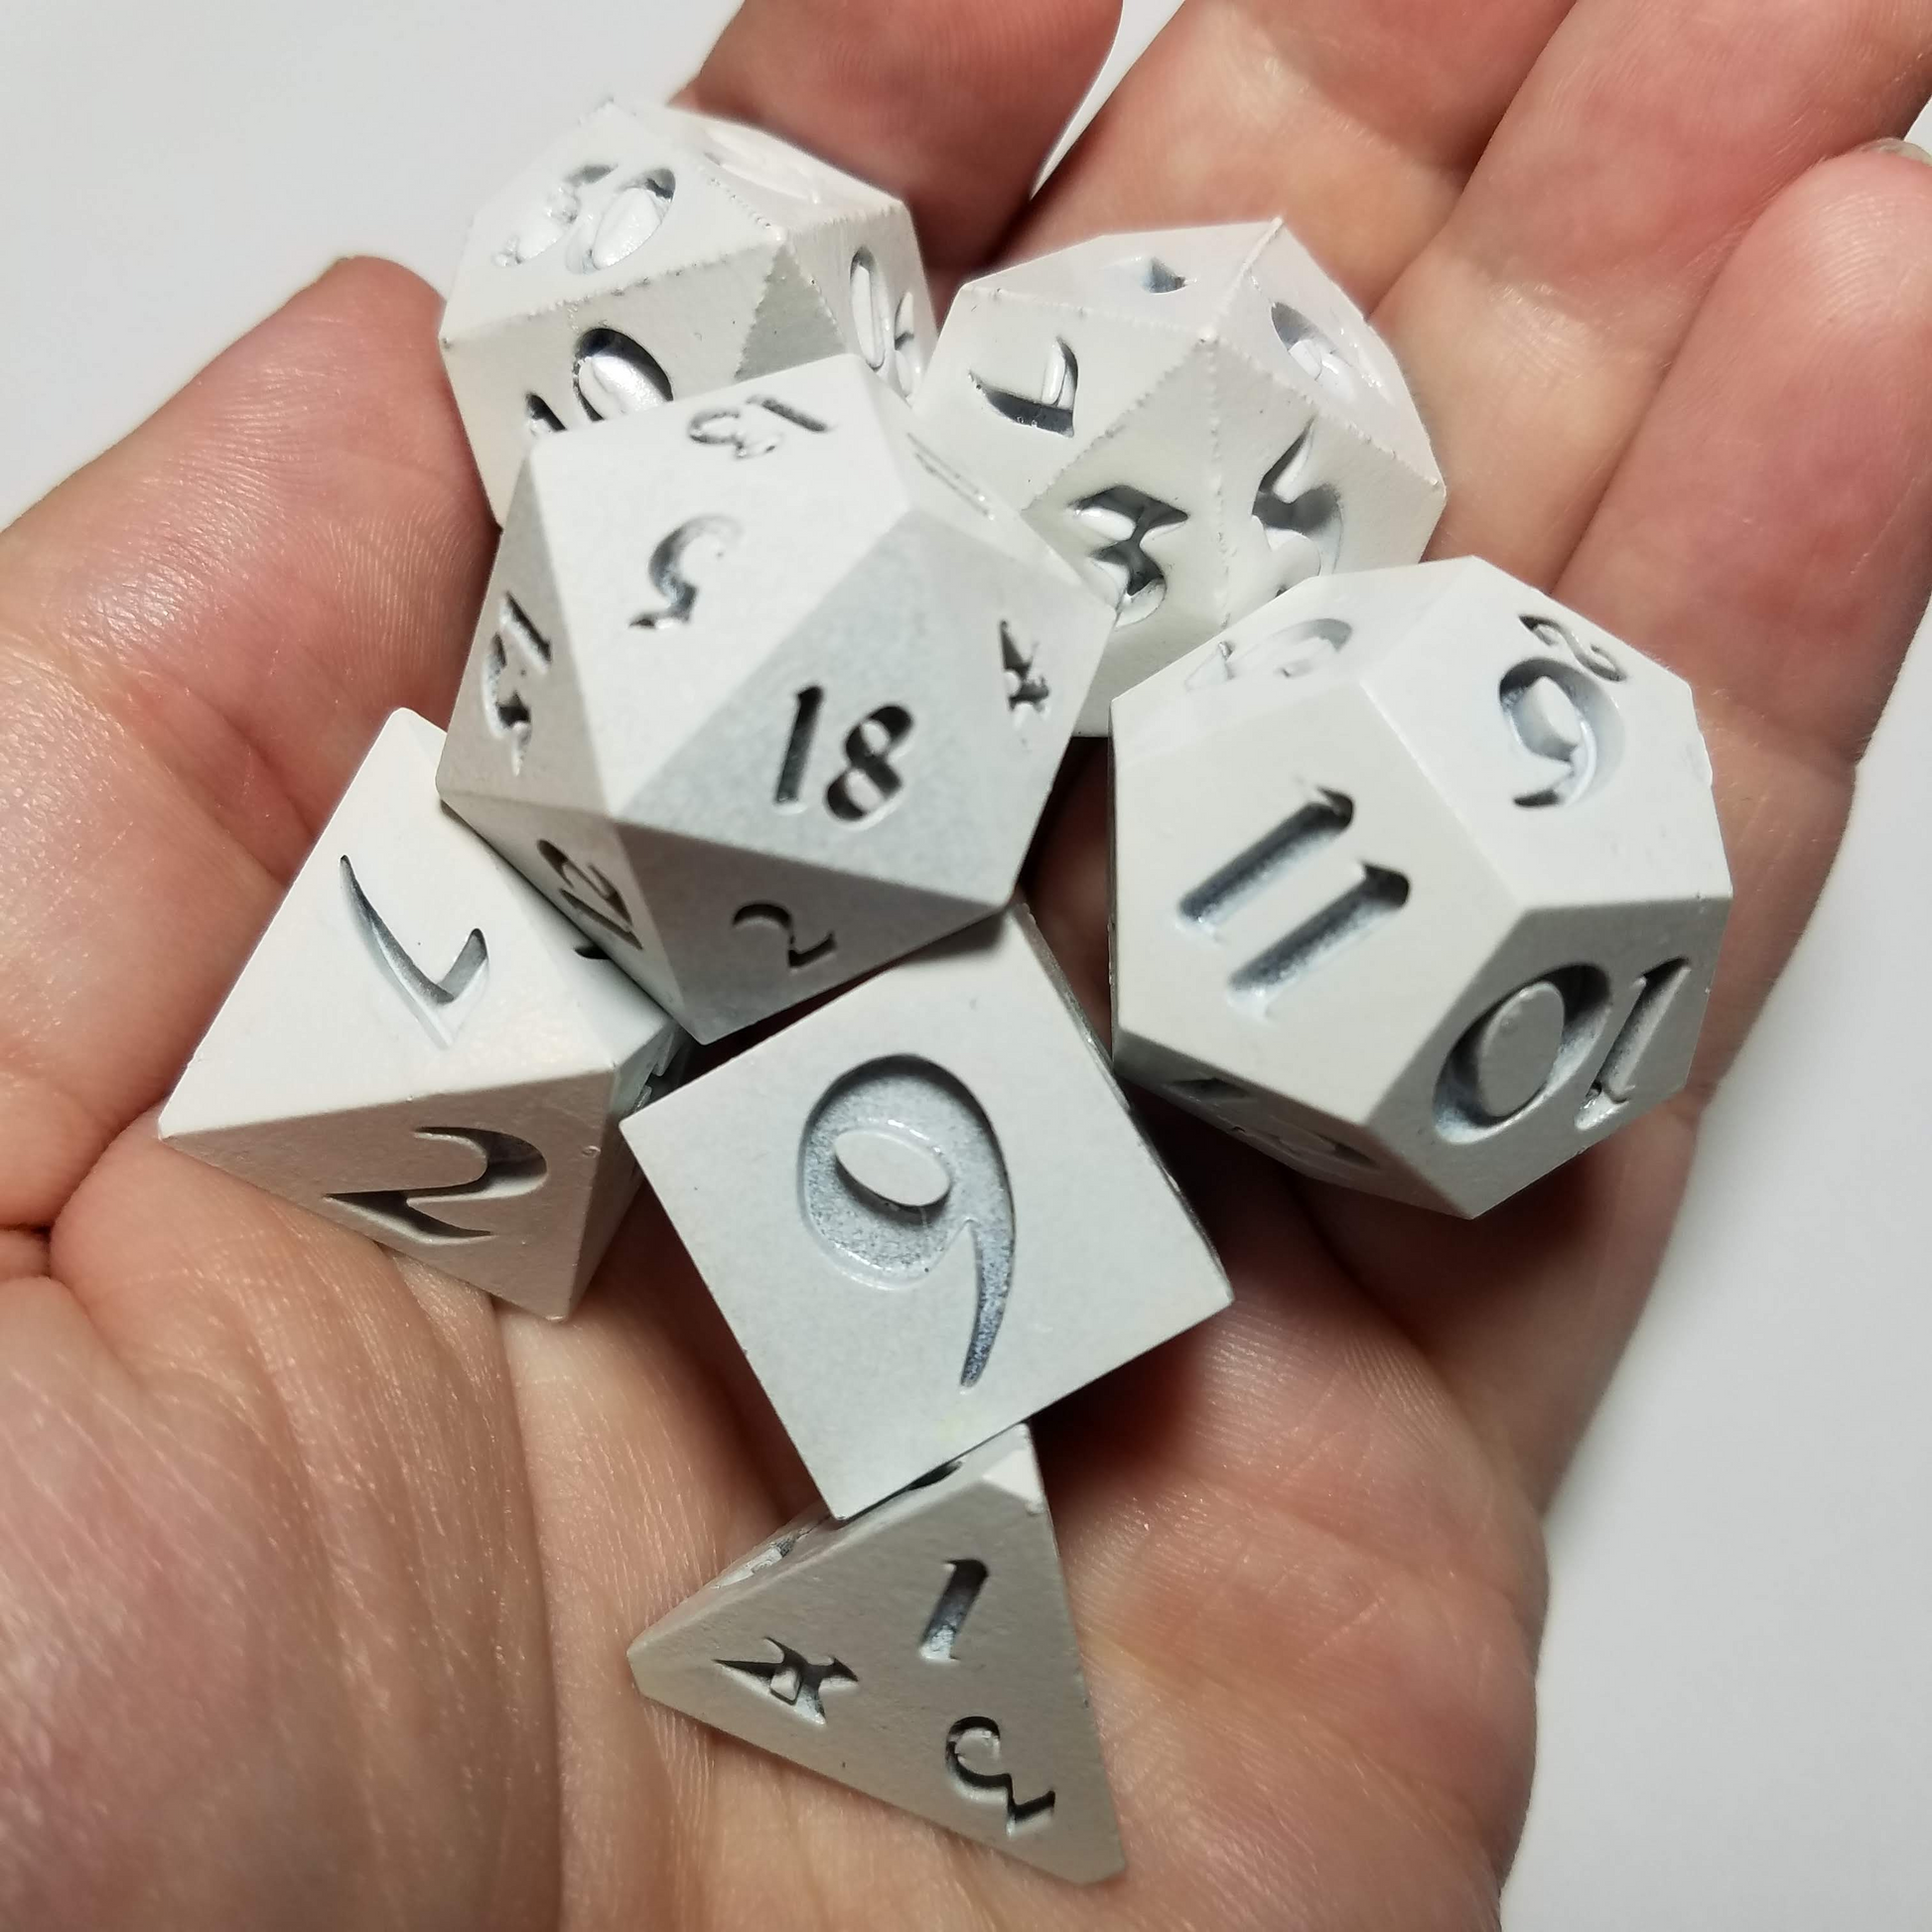 Larger D20 dice fit in the palm of your hand.